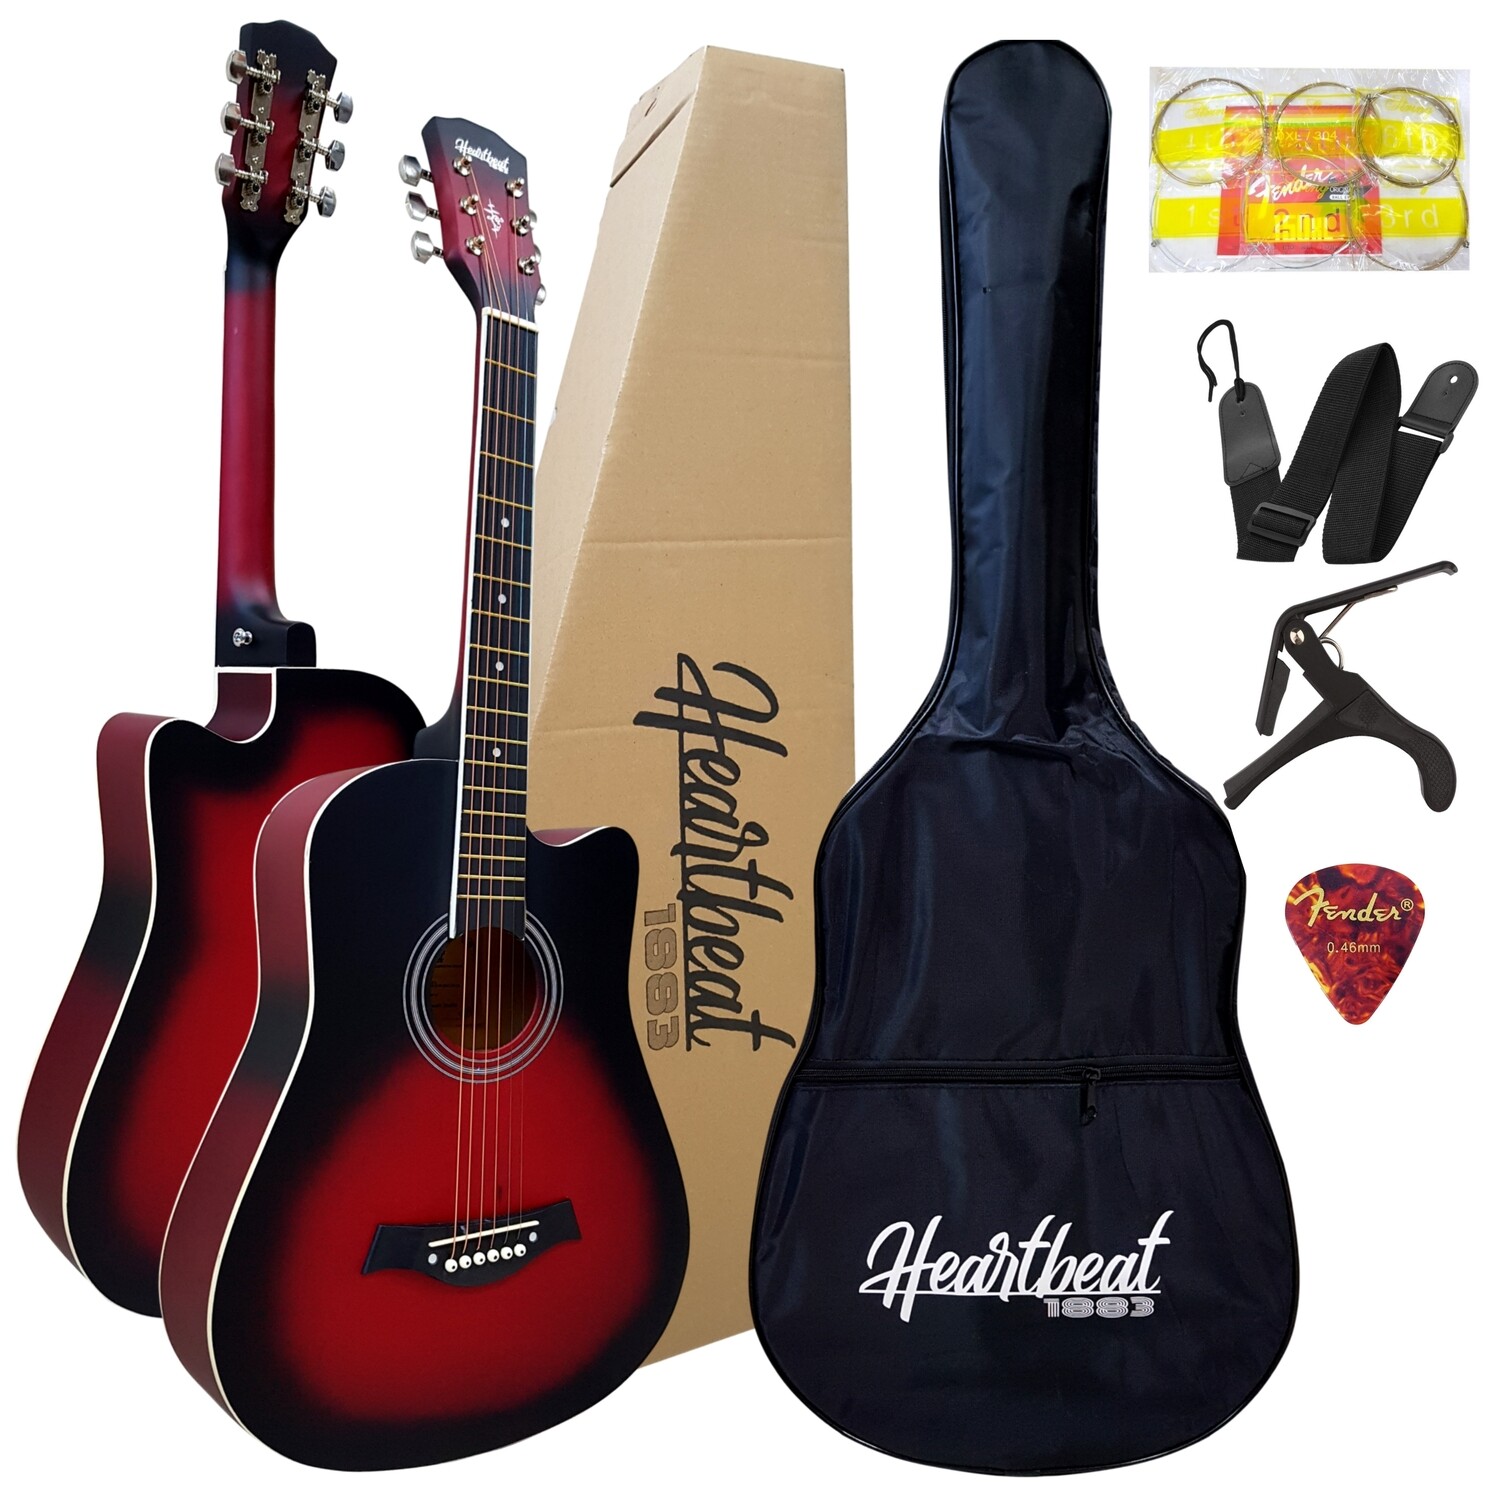 Heartbeat1883 - Acoustic Guitar 38" w/ White edge with Bag ,Belt ,Pick, Capo , String set.(Matte Red)